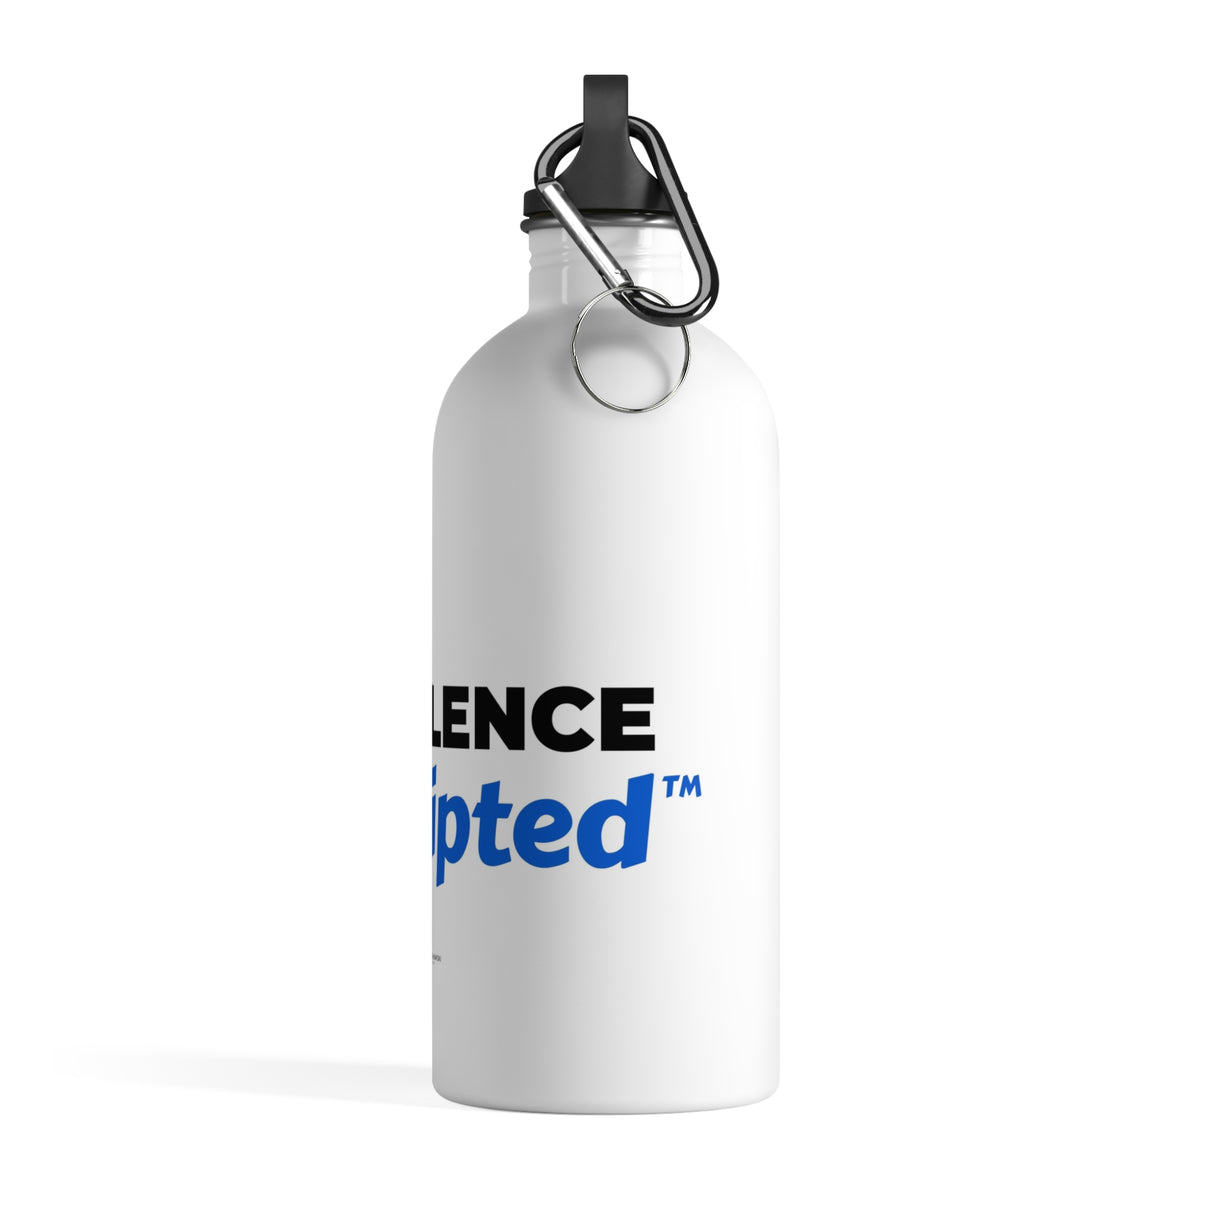 "Excellence Unscripted" Stainless Steel Water Bottle